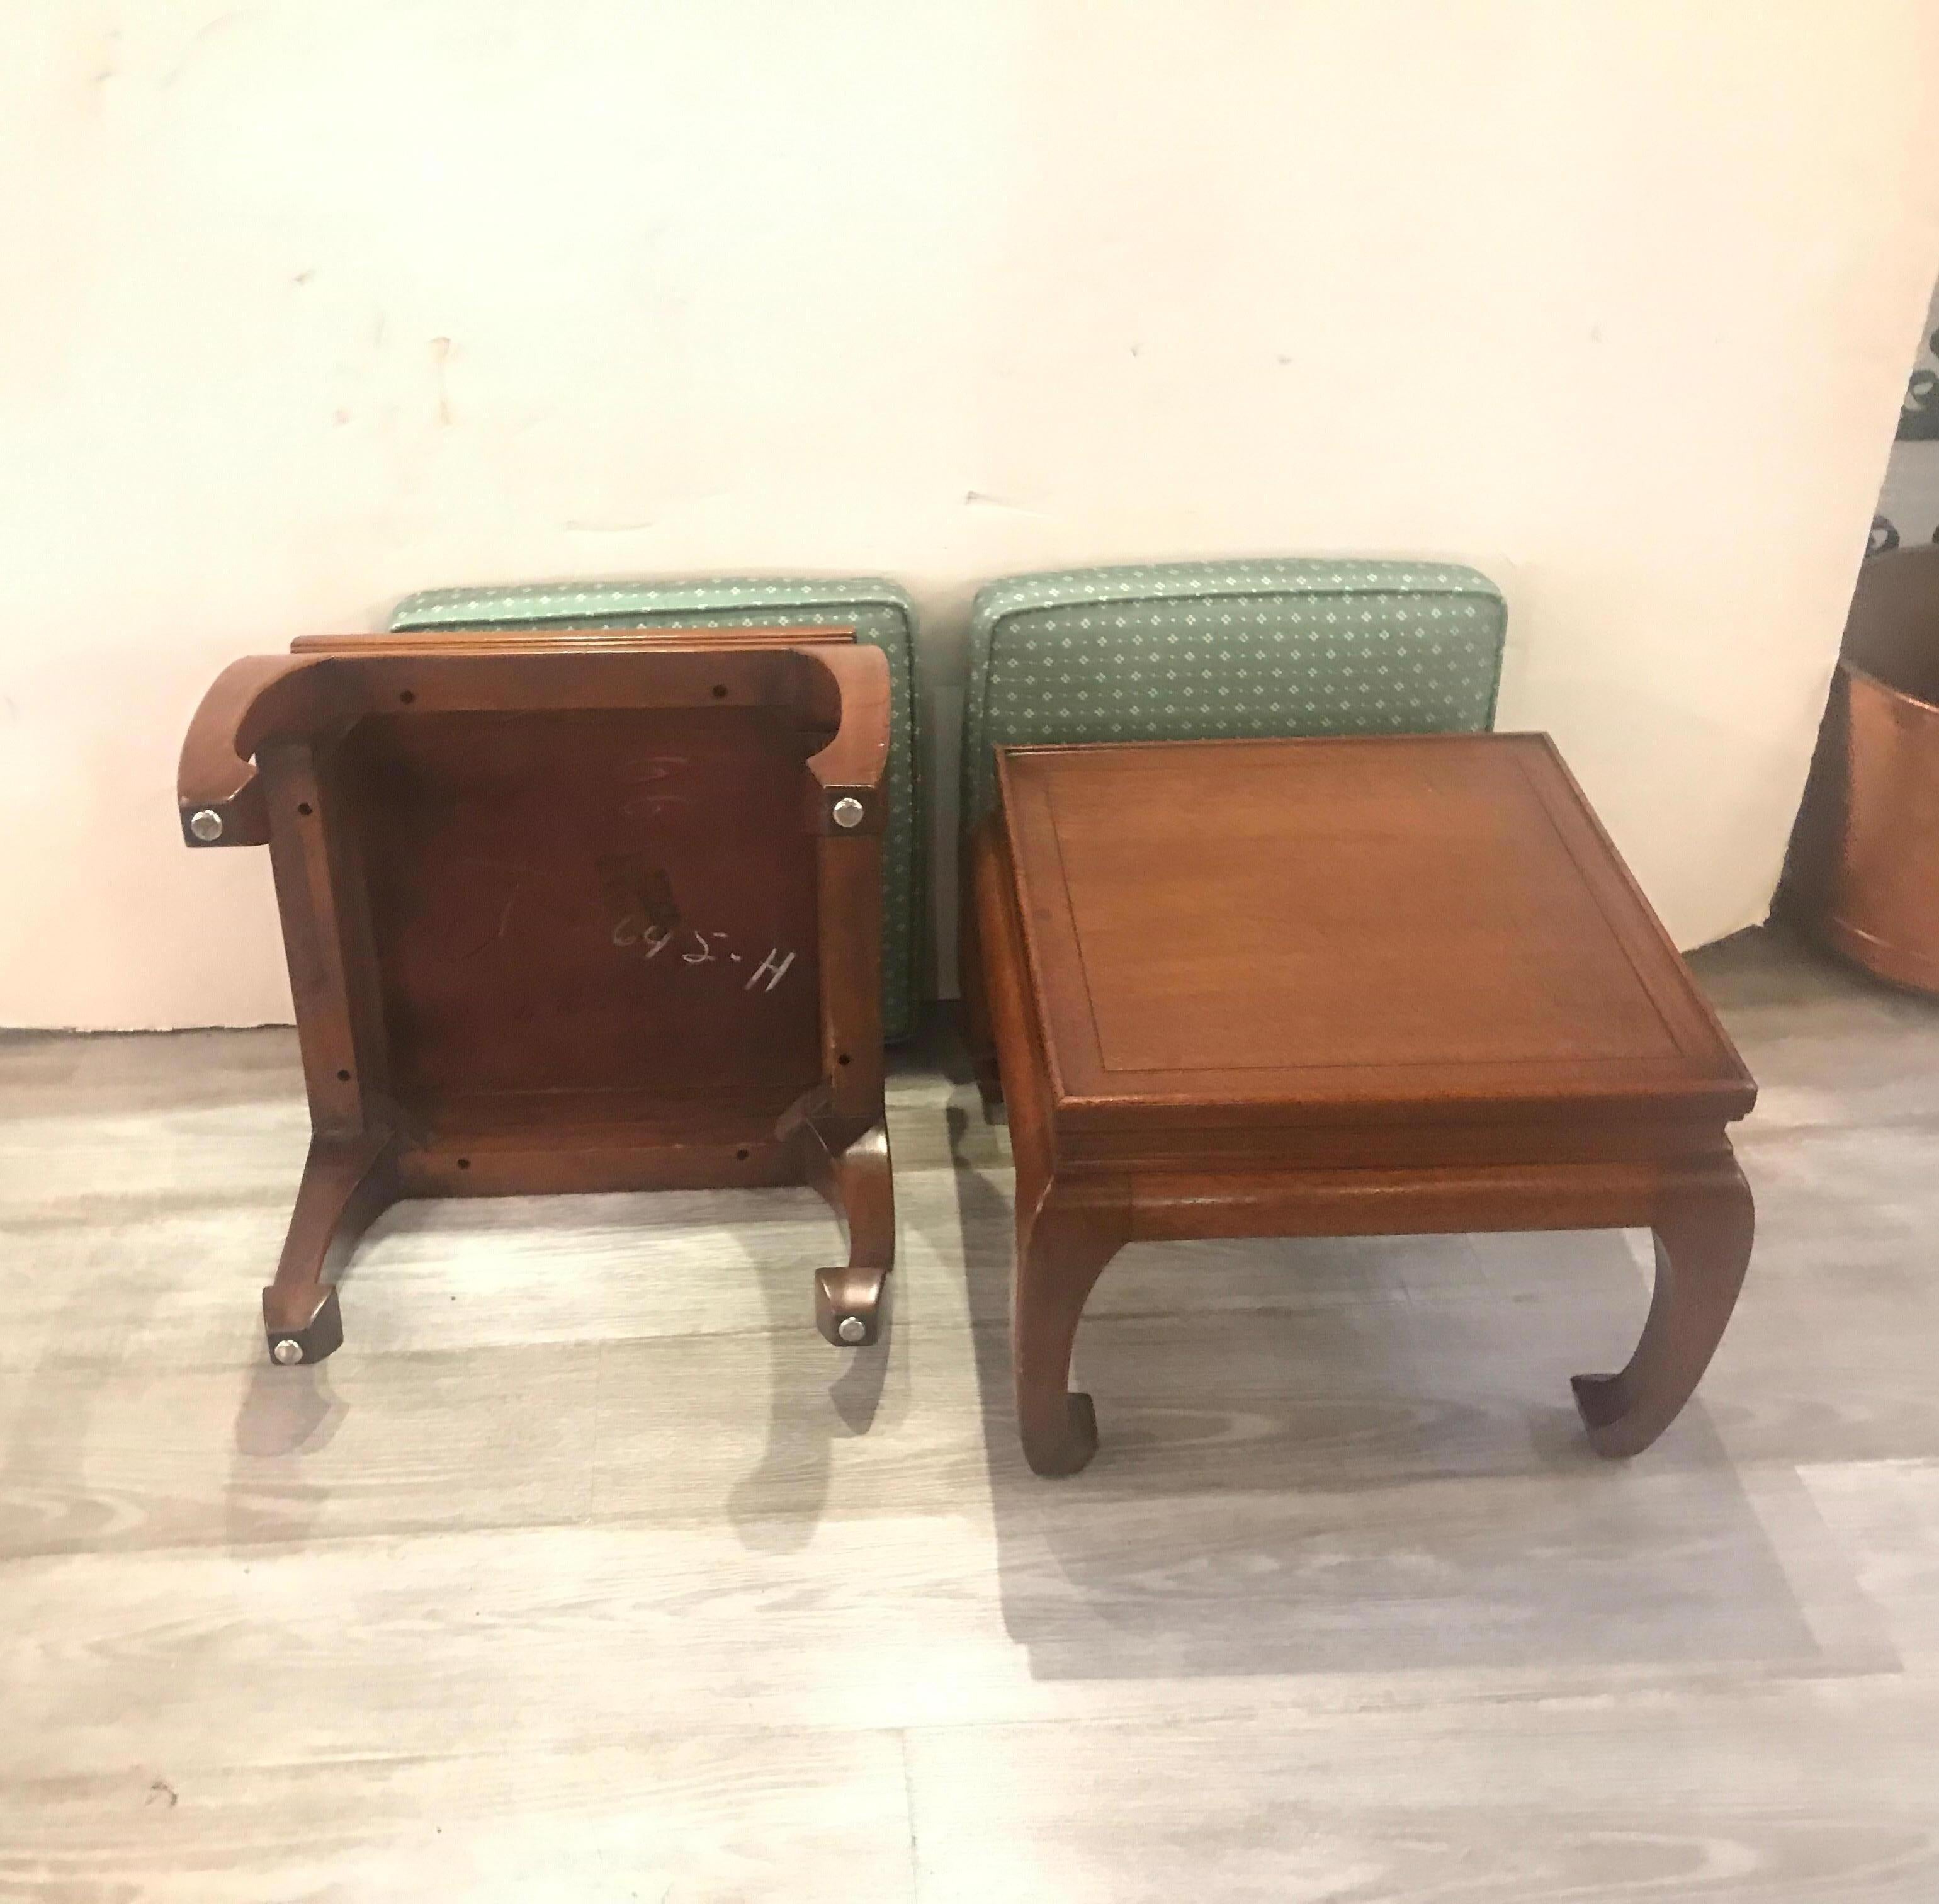 Pair of Asian Style Benches or Stands (Holz)